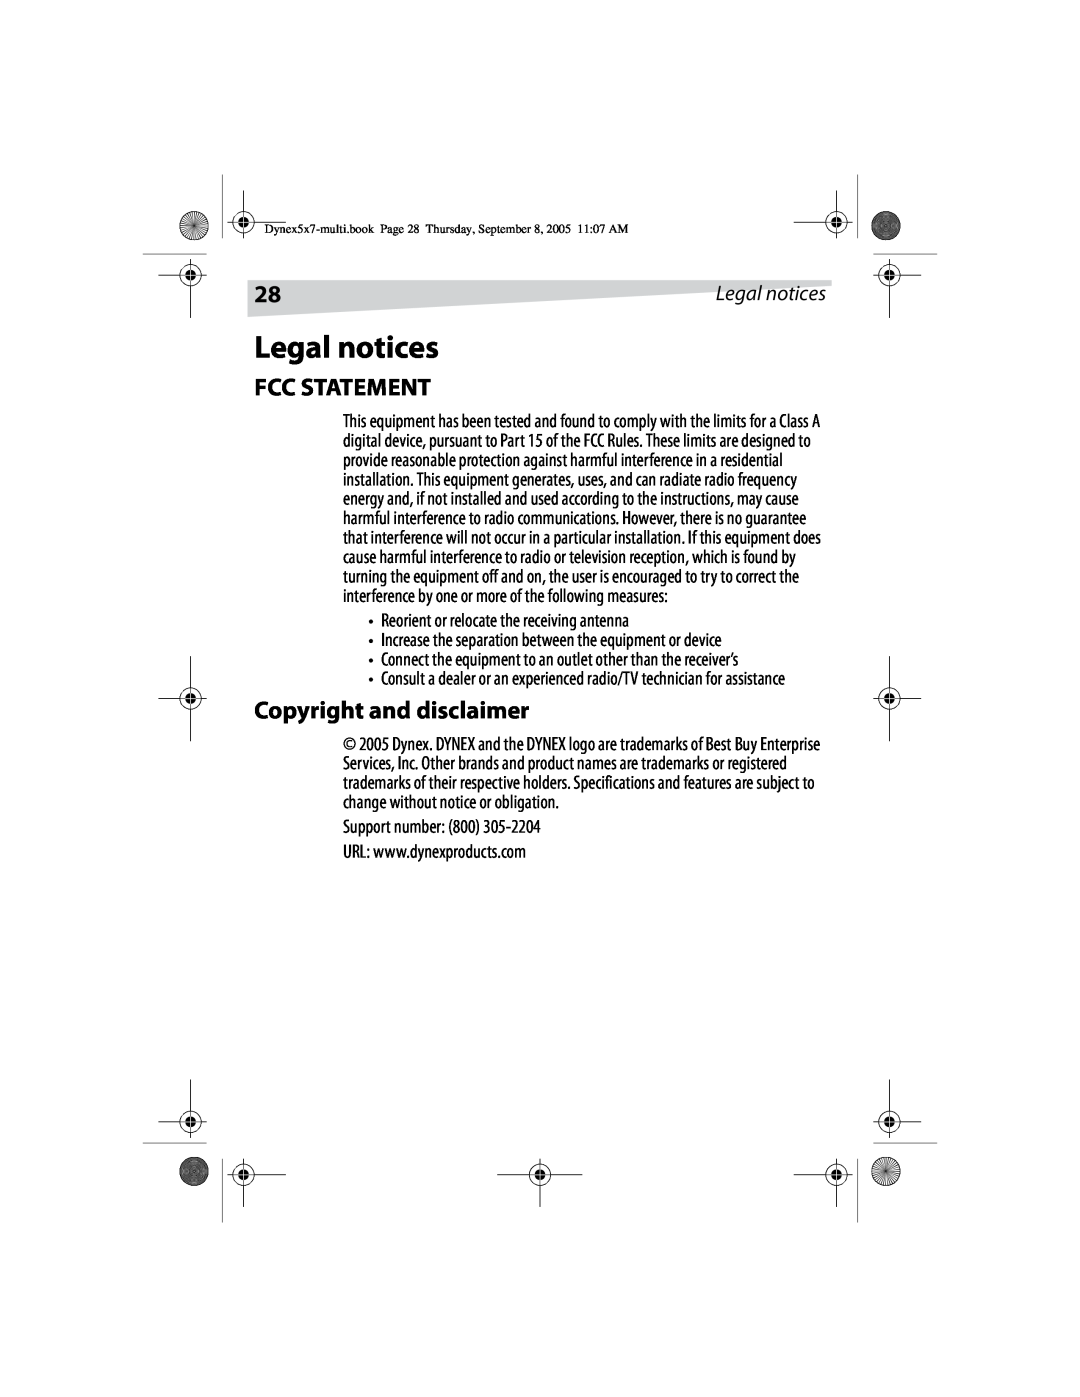 Dynex DX-E201 manual Legal notices, Fcc Statement, Copyright and disclaimer, Reorient or relocate the receiving antenna 